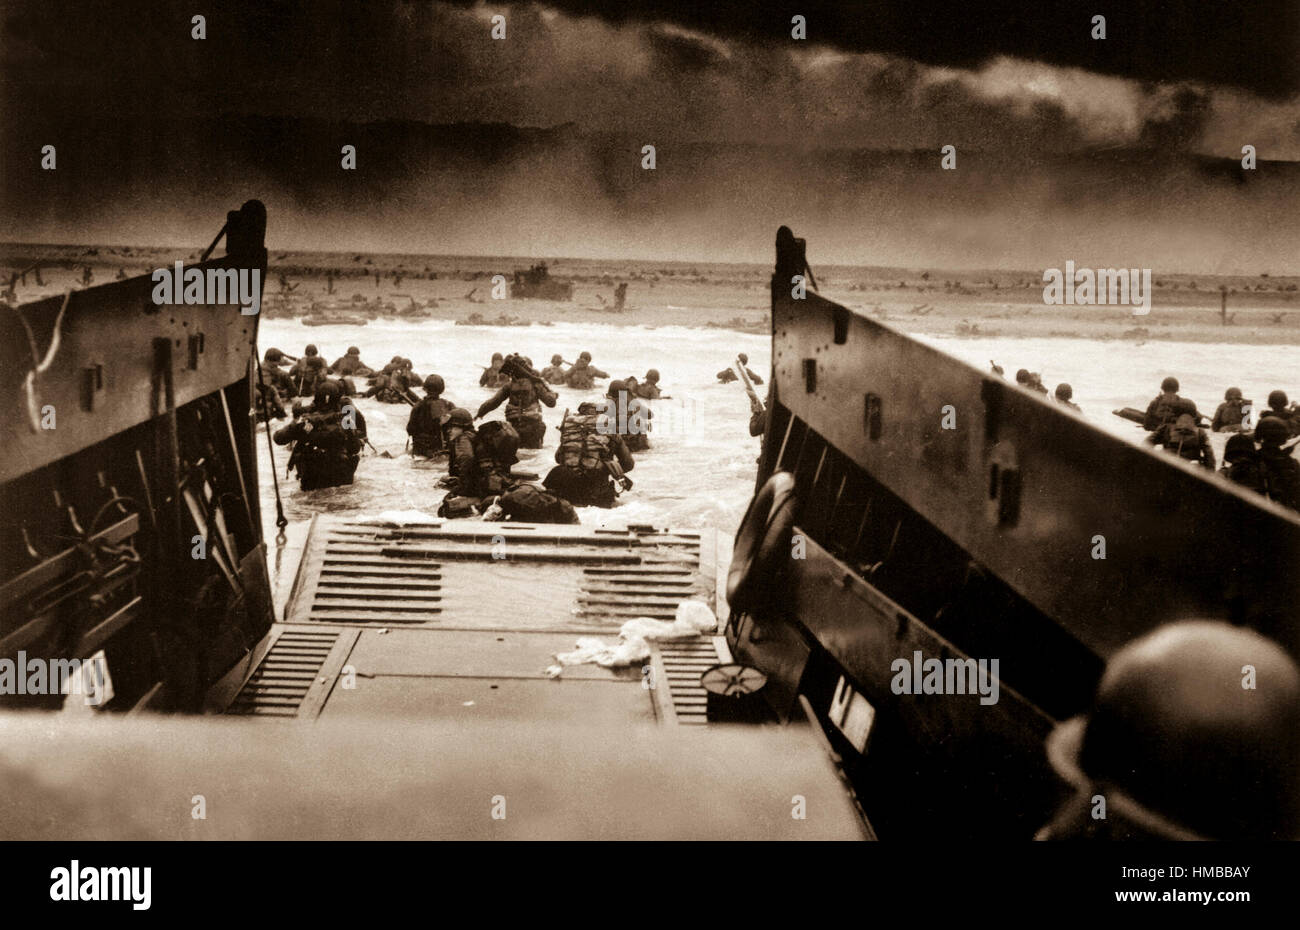 Landing on the coast of France under heavy Nazi machine gun fire are these American soldiers, shown just as they left the ramp of a Coast Guard landing boat, June 6, 1944.  CPhoM. Robert F. Sargent. (Coast Guard) NARA FILE #:  026-G-2343 WAR & CONFLICT BOOK #:  1041 Stock Photo